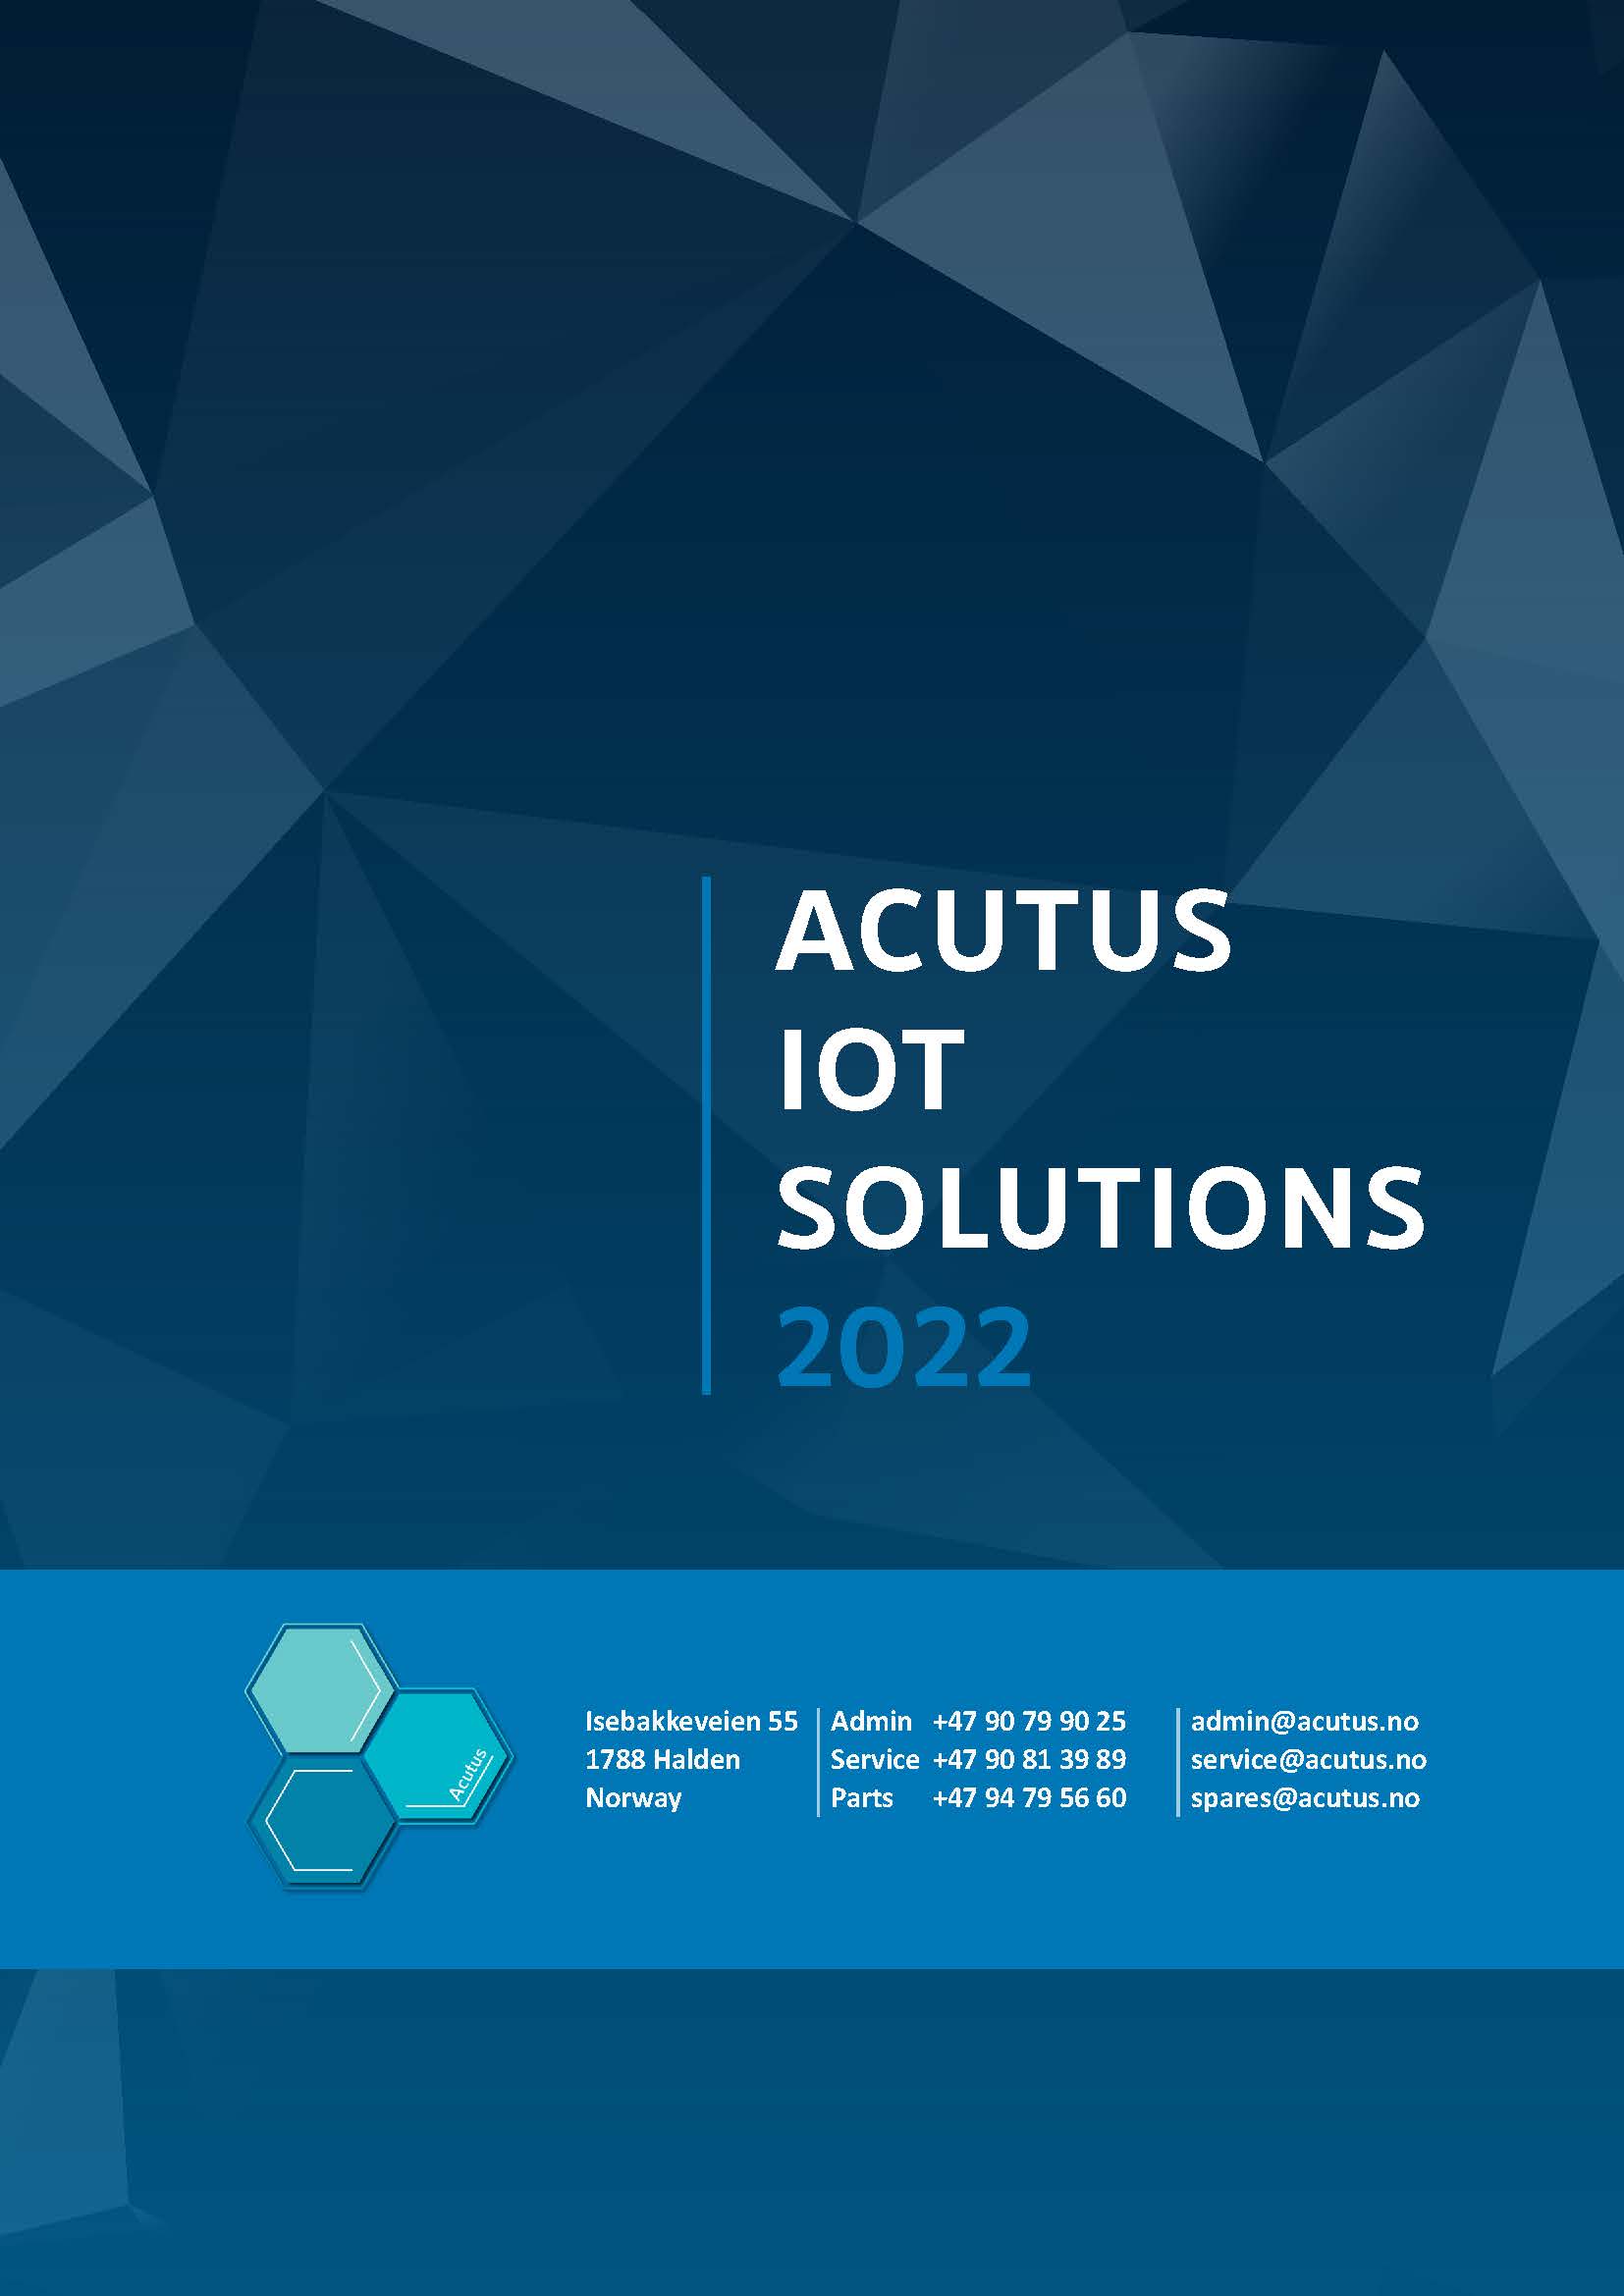 Acutus IoT Solutions Download Material